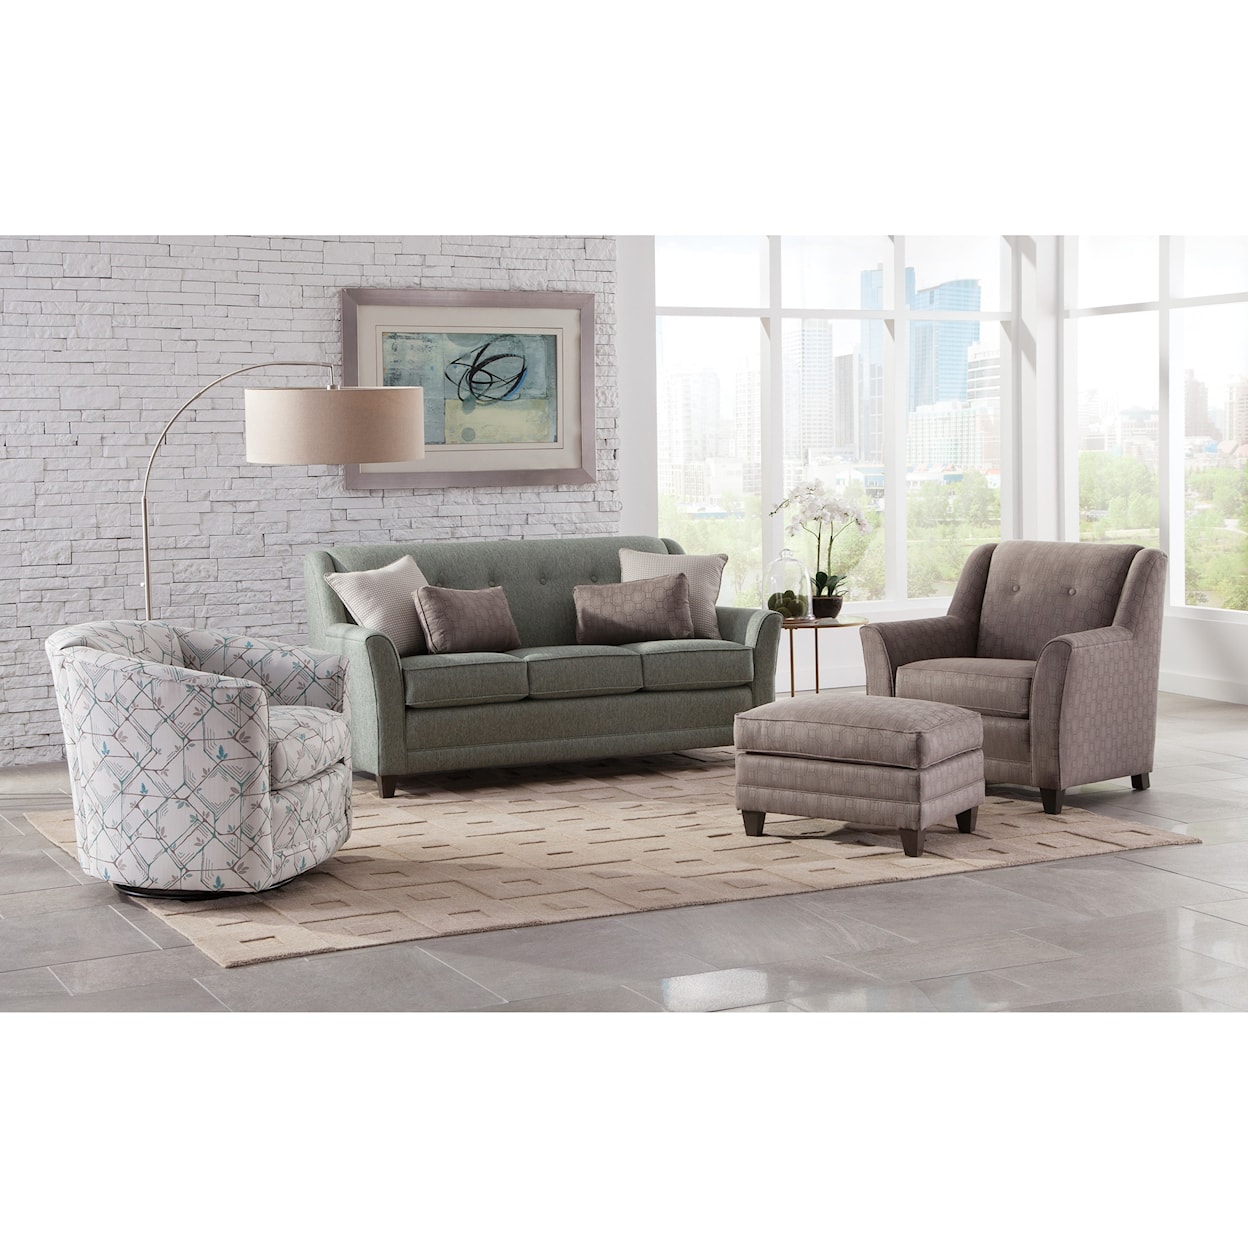 Smith Brothers 236 Mid-Size Sofa